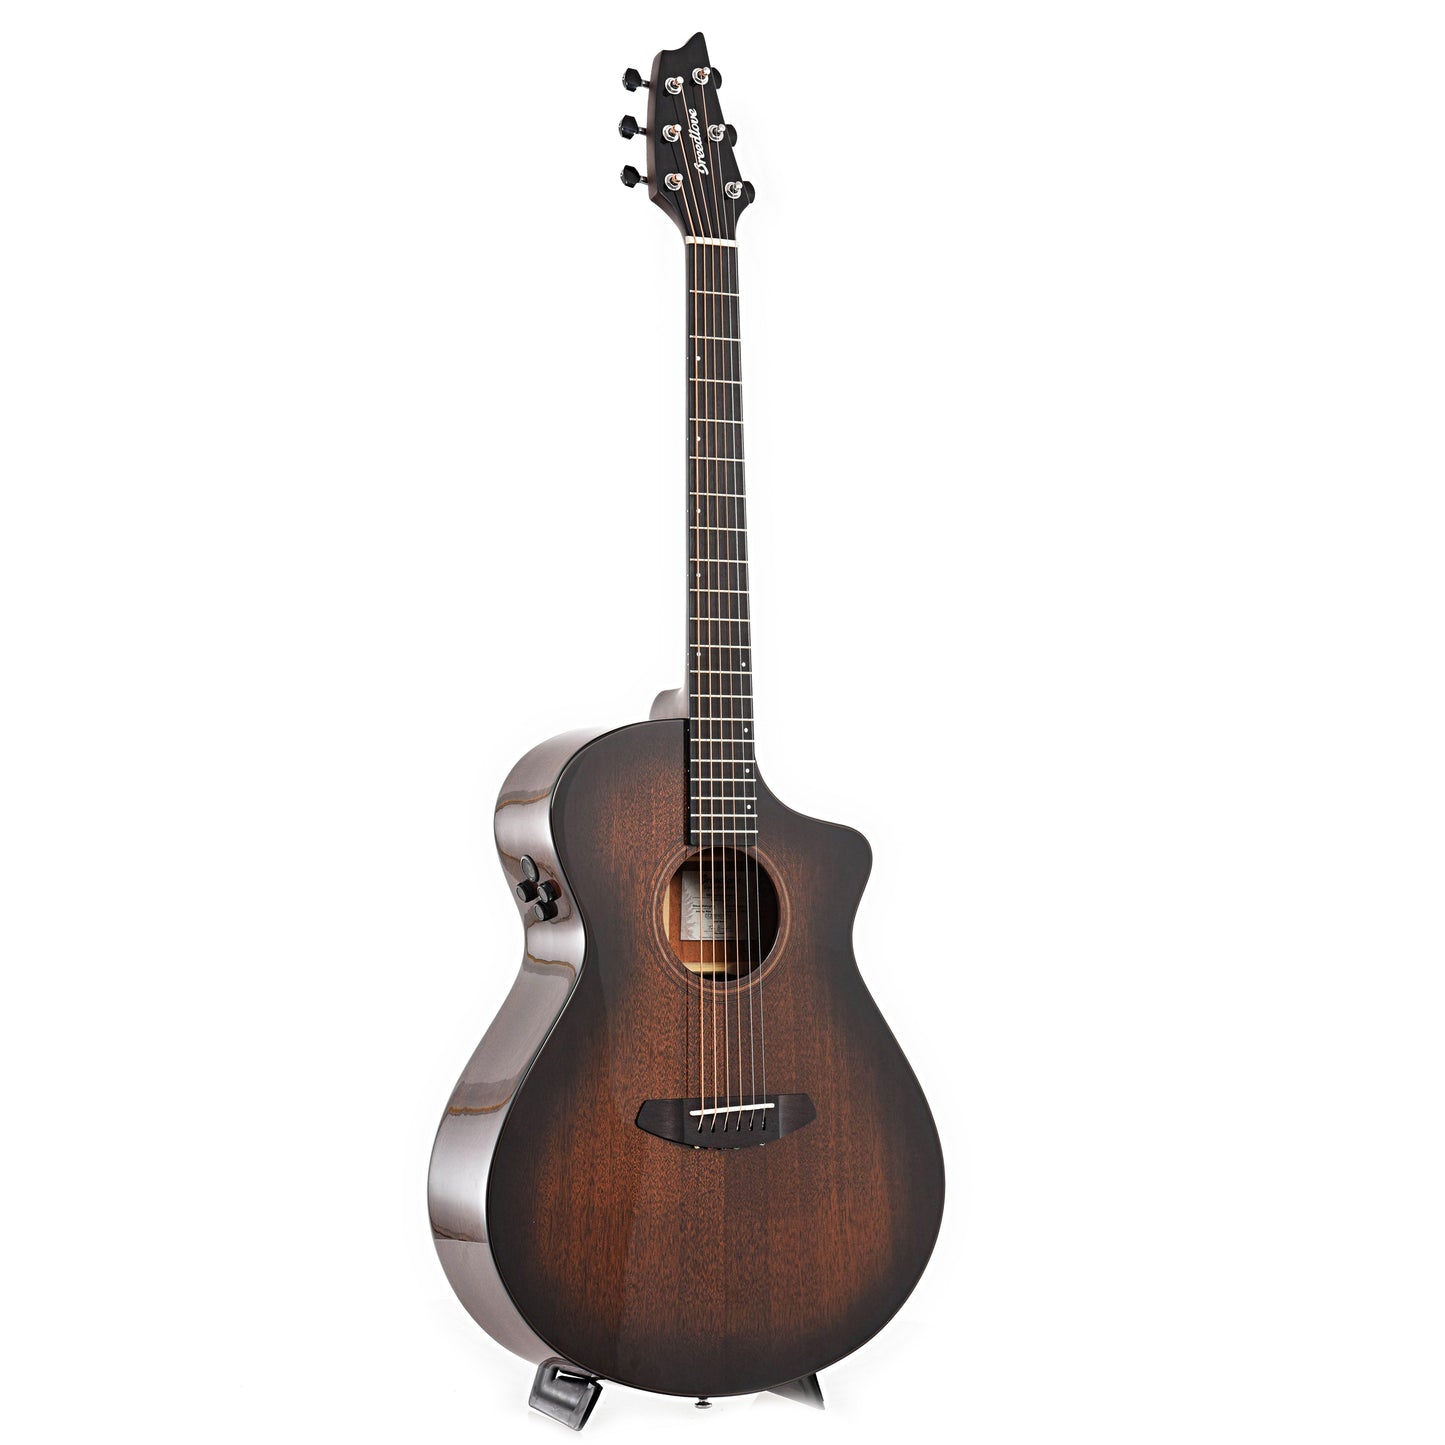 Breedlove Organic Wildwood Pro Concert Suede CE African Mahogany-African Mahogany Acoustic-Electric Guitar